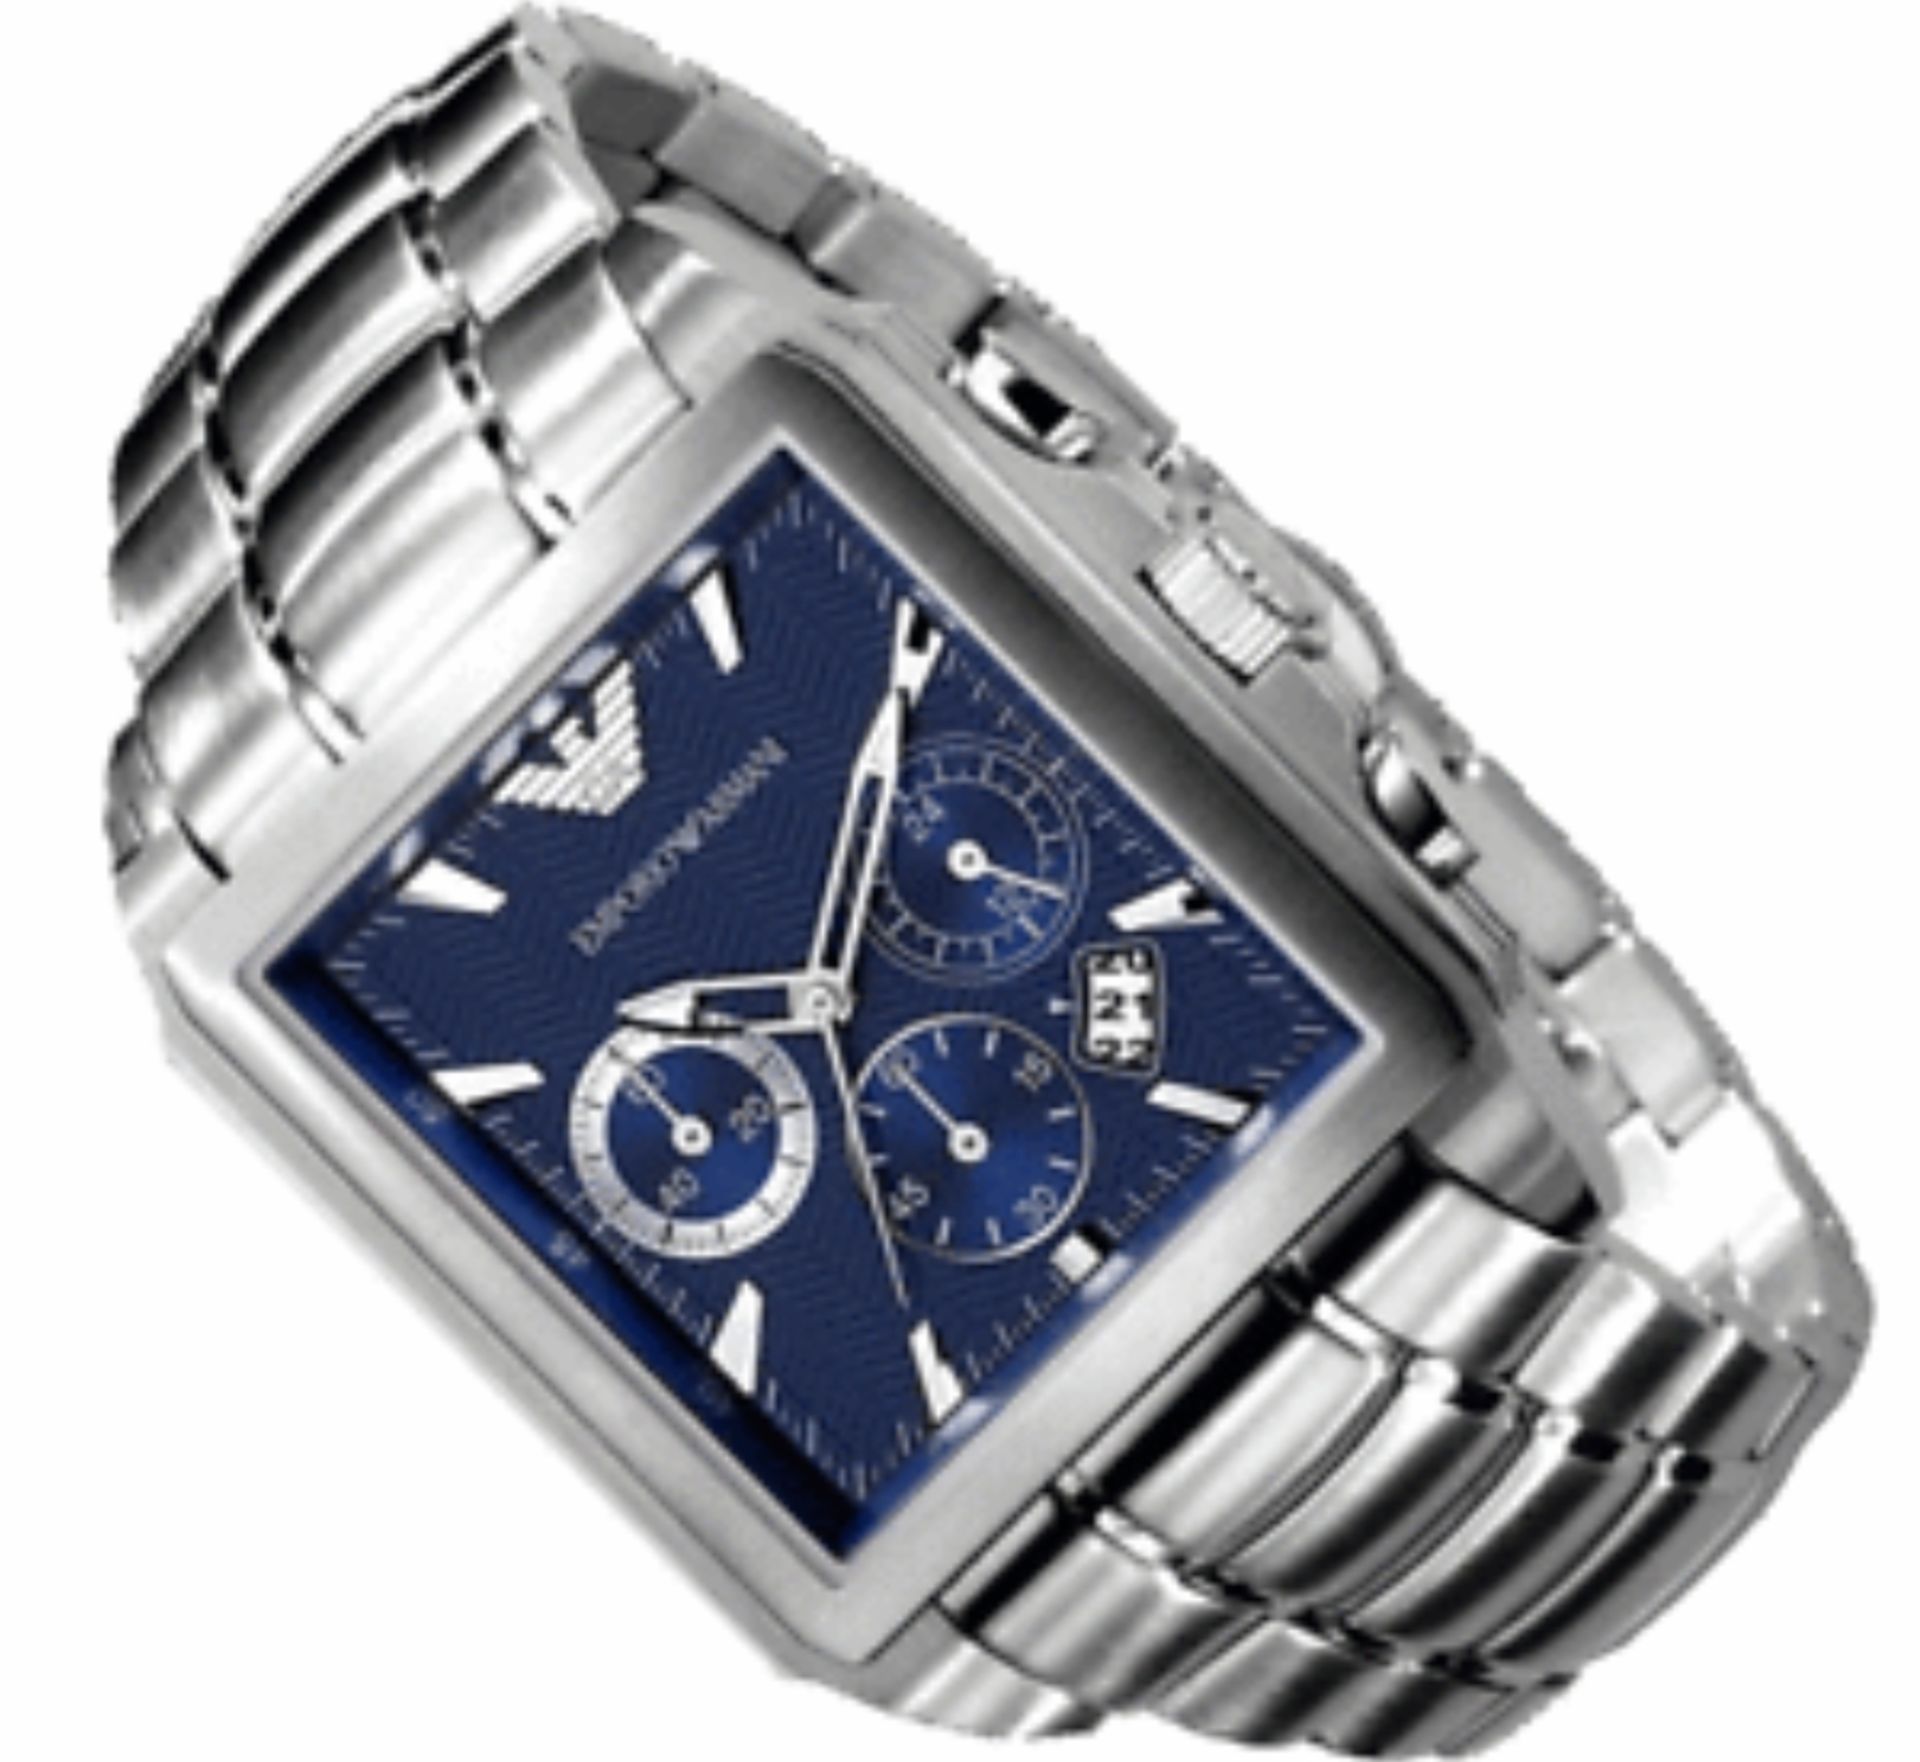 Emporio Armani AR0660 Men's Square Dial Silver Stainless Steel Bracelet Chronograph Watch - Image 4 of 8